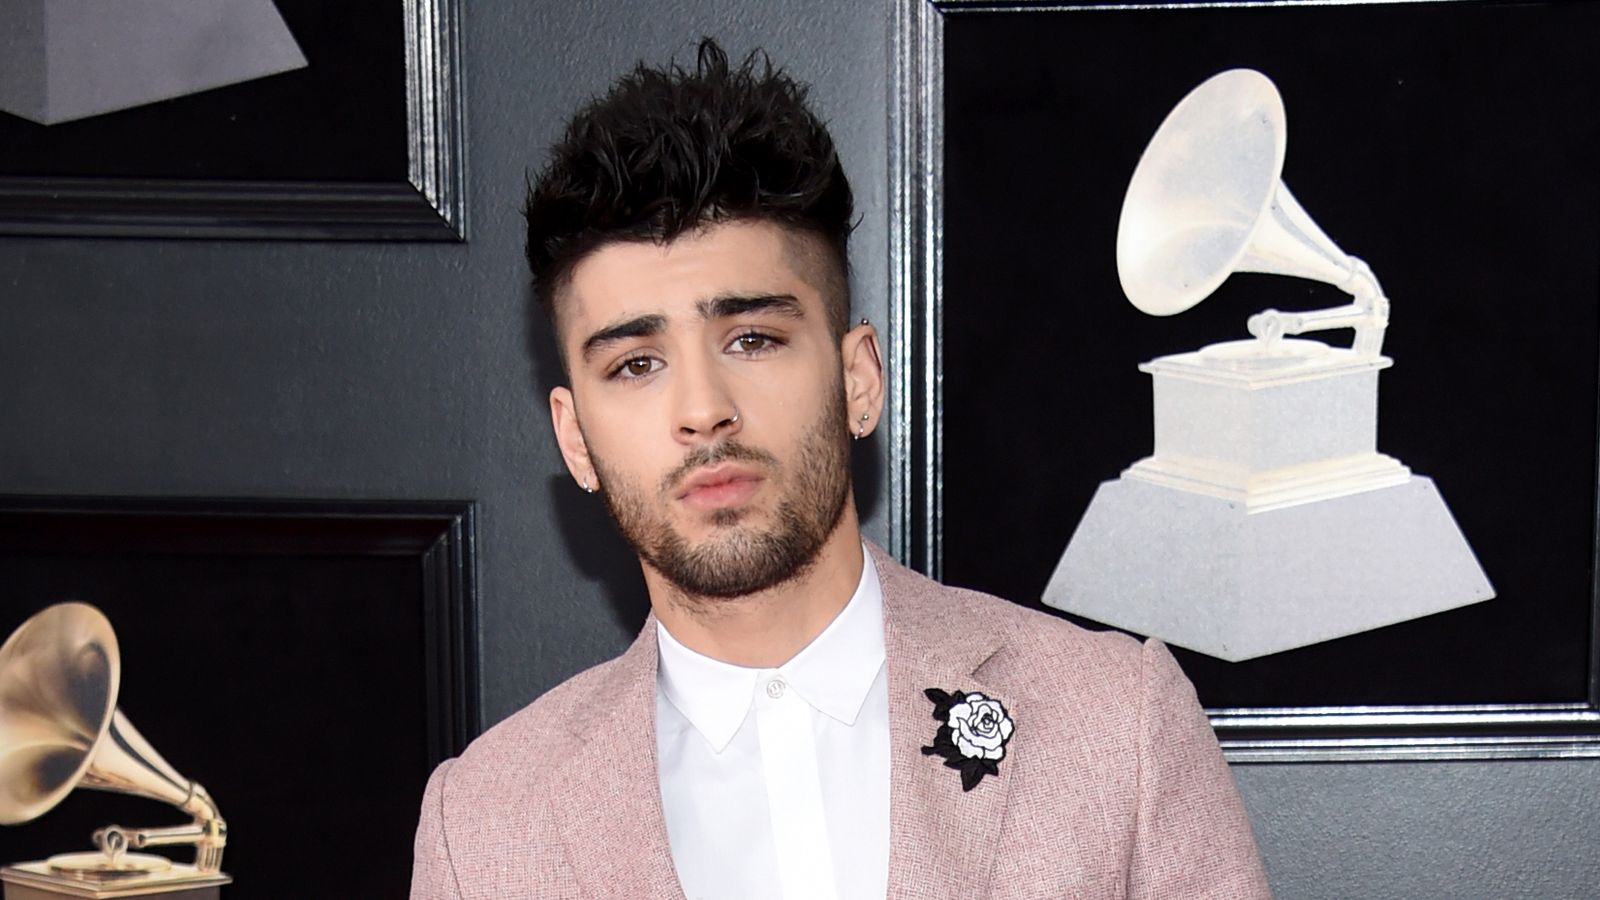 Zayn Malik details reasons for leaving One Direction in first interview in six years